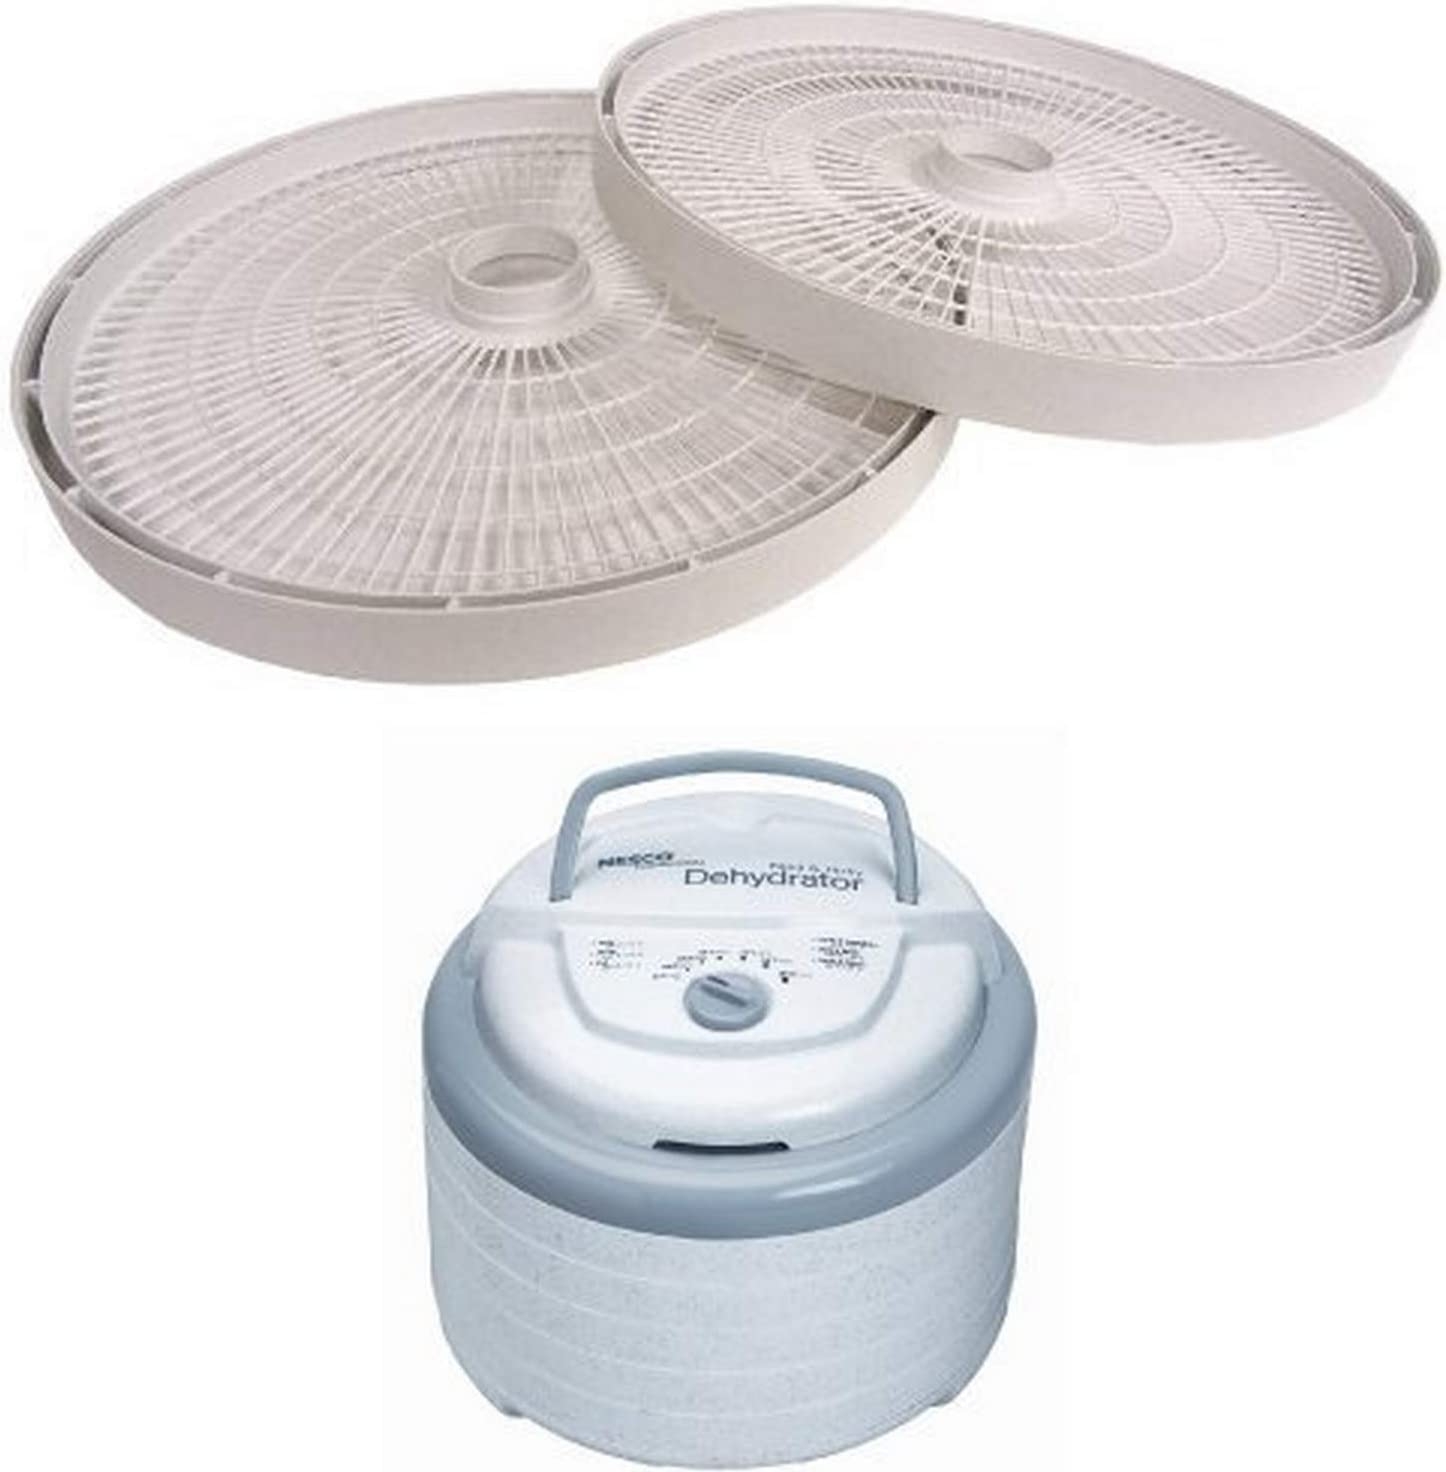 NESCO FD-75A Snackmaster Pro Food Dehydrator, For Snacks, Fruit, Beef Jerky, Gray Import To Shop ×Product customization General